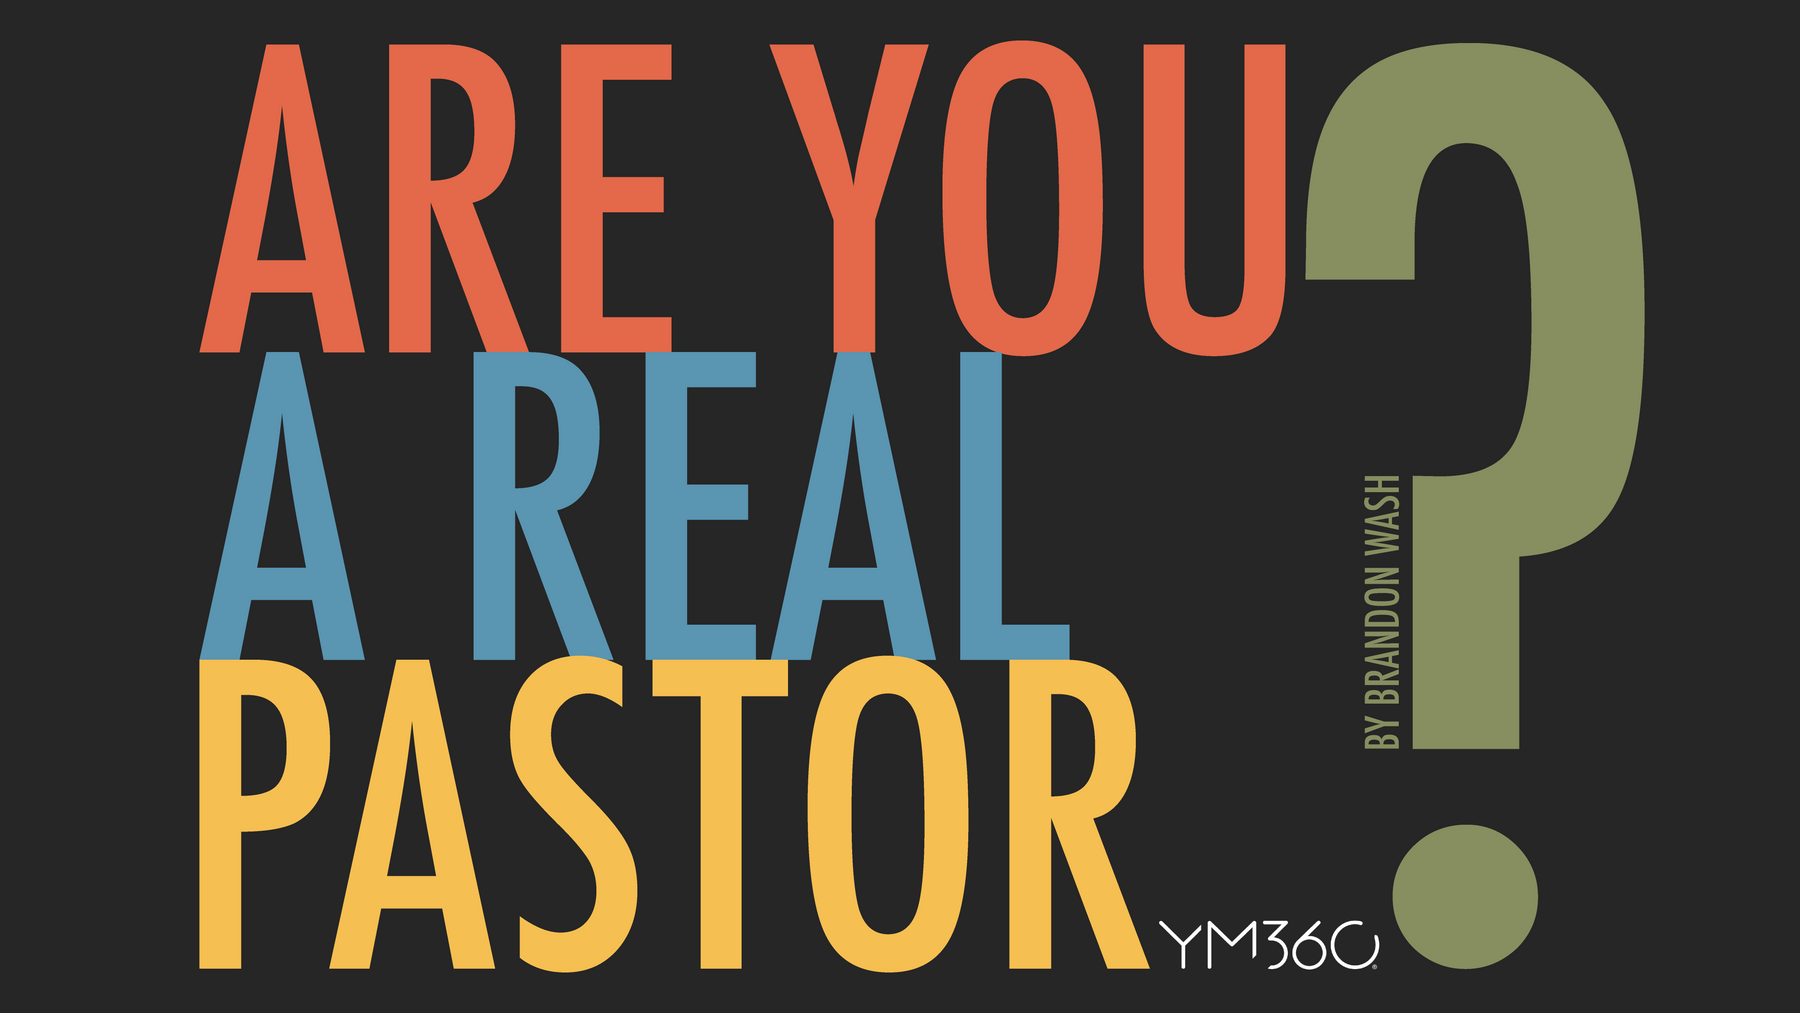 Are You a Real Pastor?